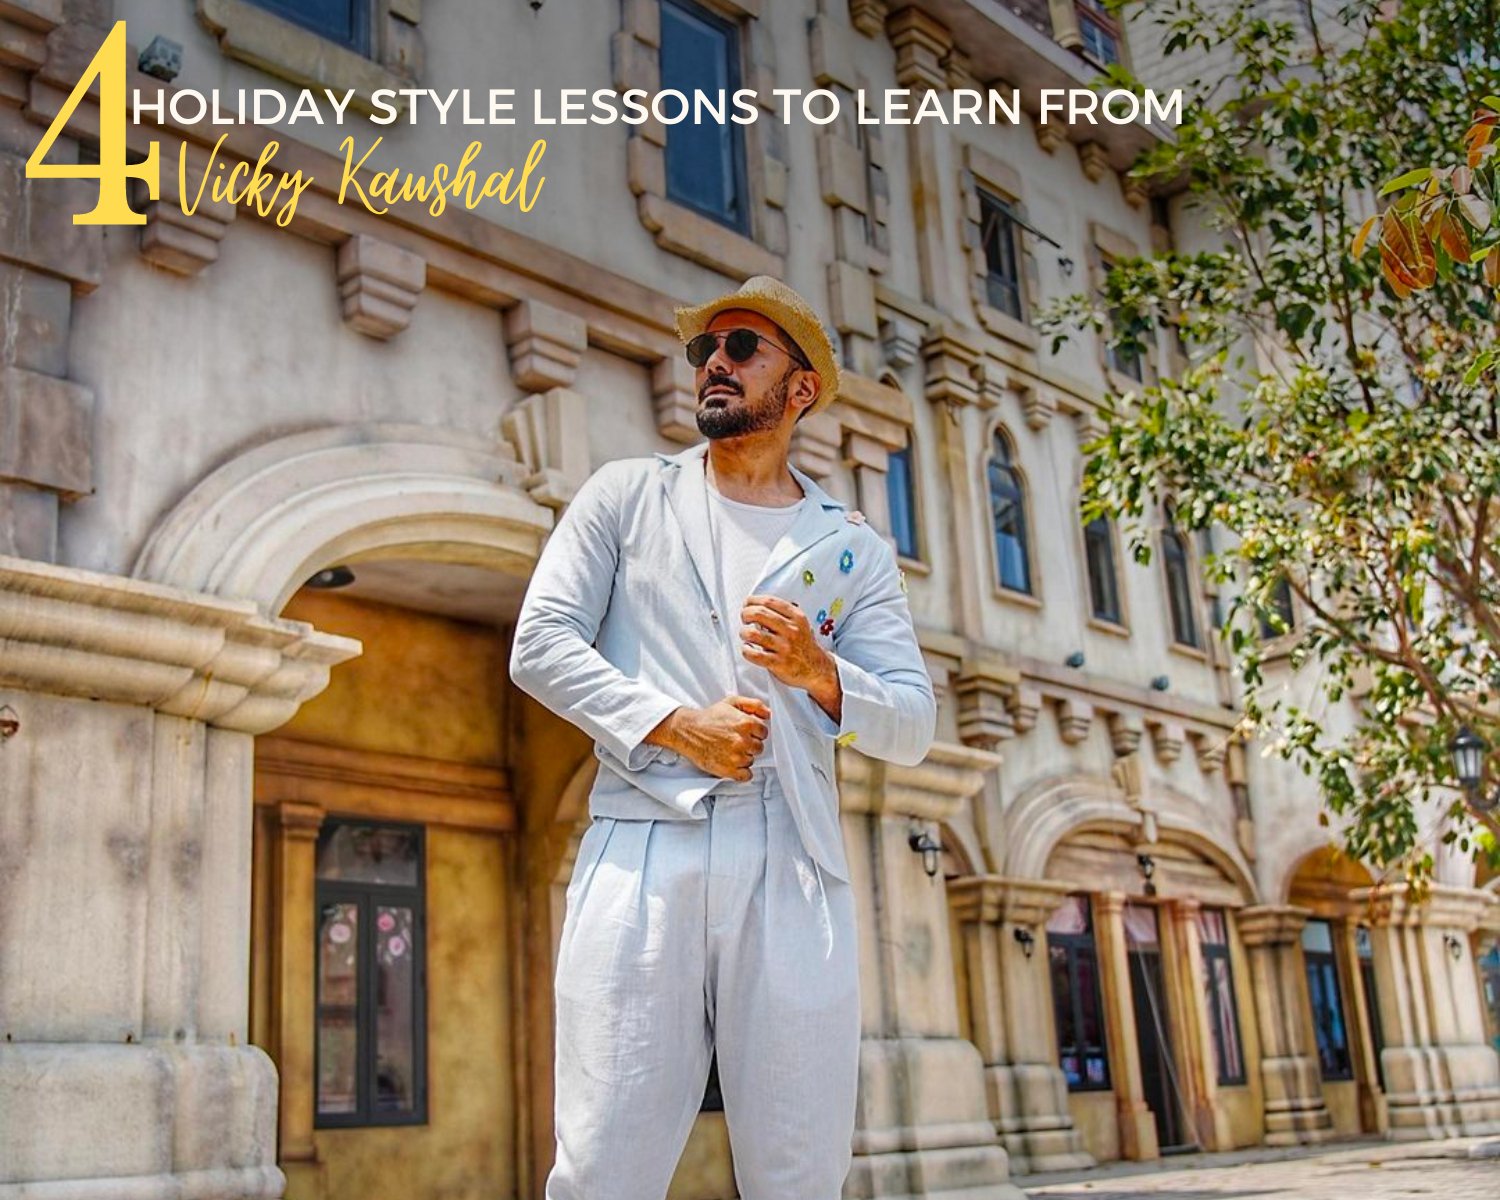 4 holiday style lessons to learn from Vicky Kaushal - Ted Ferde